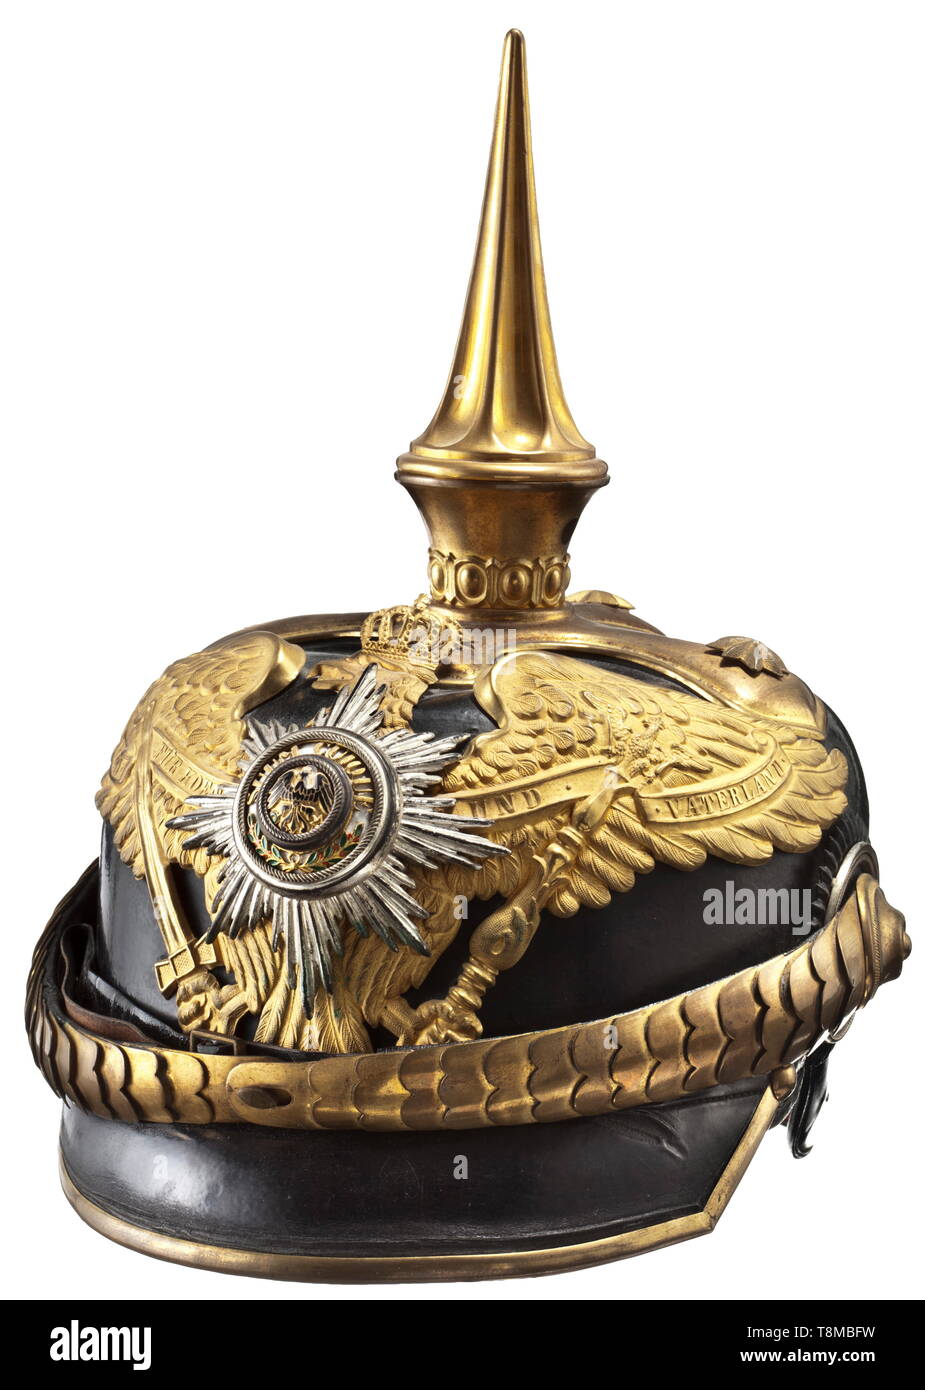 A general's helmet from the possession of Otto von Lauenstein Leather bodyl with fire gilt fittings, cruciform base with star-shaped screws (one is missing) and tall, elegant spike, the helmet eagle with applied silver star of the High Order of the Black Eagle. Gilt chinscales, cockades, silk rep lining. Also three photos of Lauenstein. Untouched helmet directly from the family of the original owner. historic, historical, Prussian, Prussia, German, Germany, militaria, military, object, objects, stills, clipping, clippings, cut out, cut-out, cut-outs, 20th century, Editorial-Use-Only Stock Photo